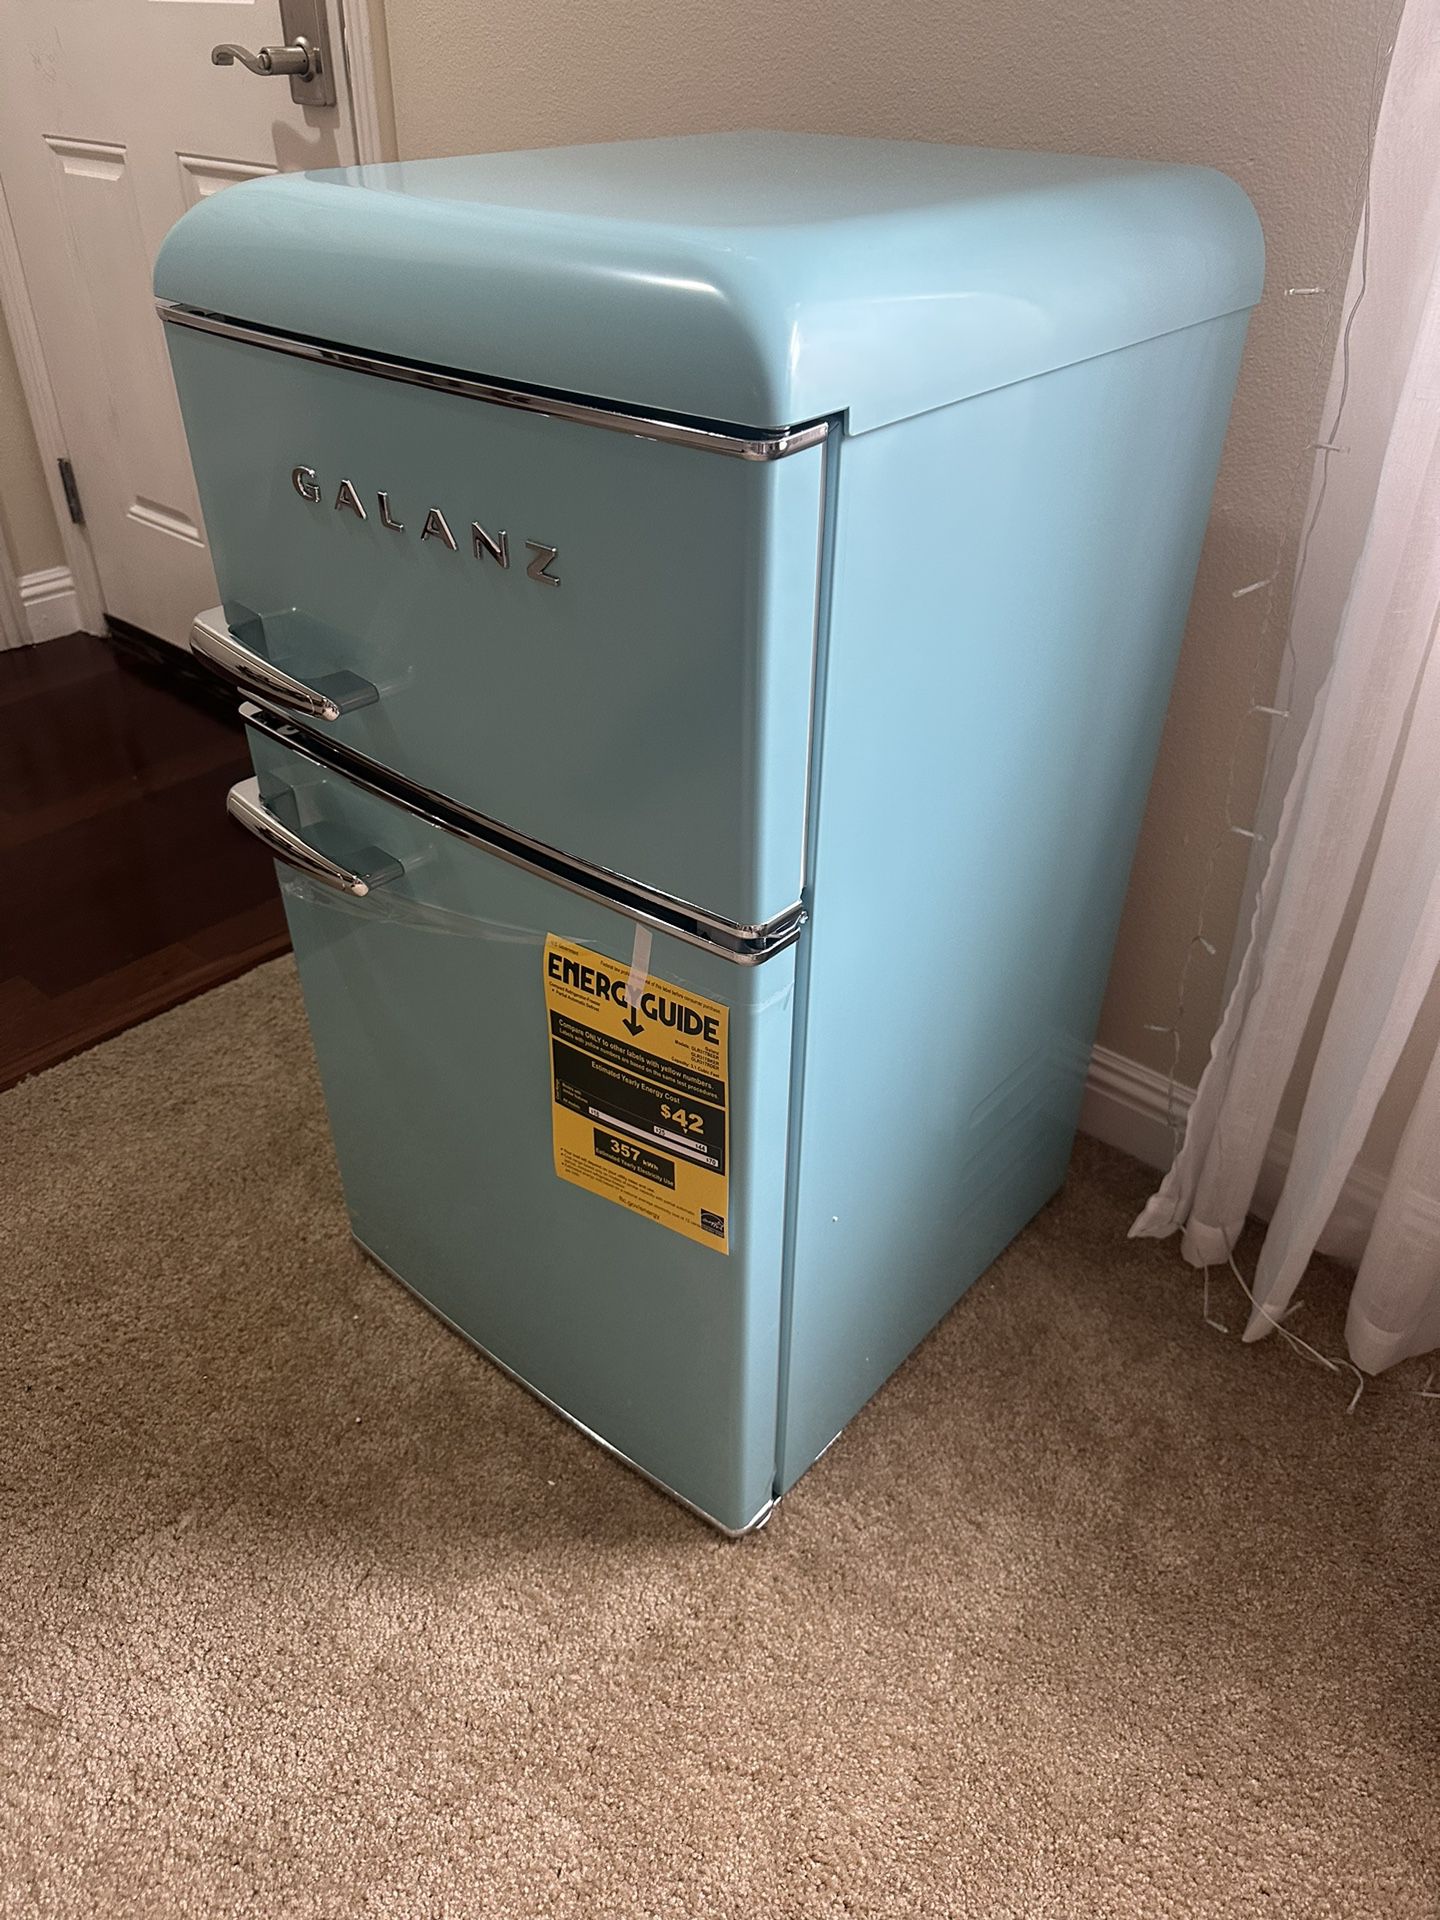 Galanz Refrigerator 2FJMP for Sale in Los Rnchs Abq, NM - OfferUp